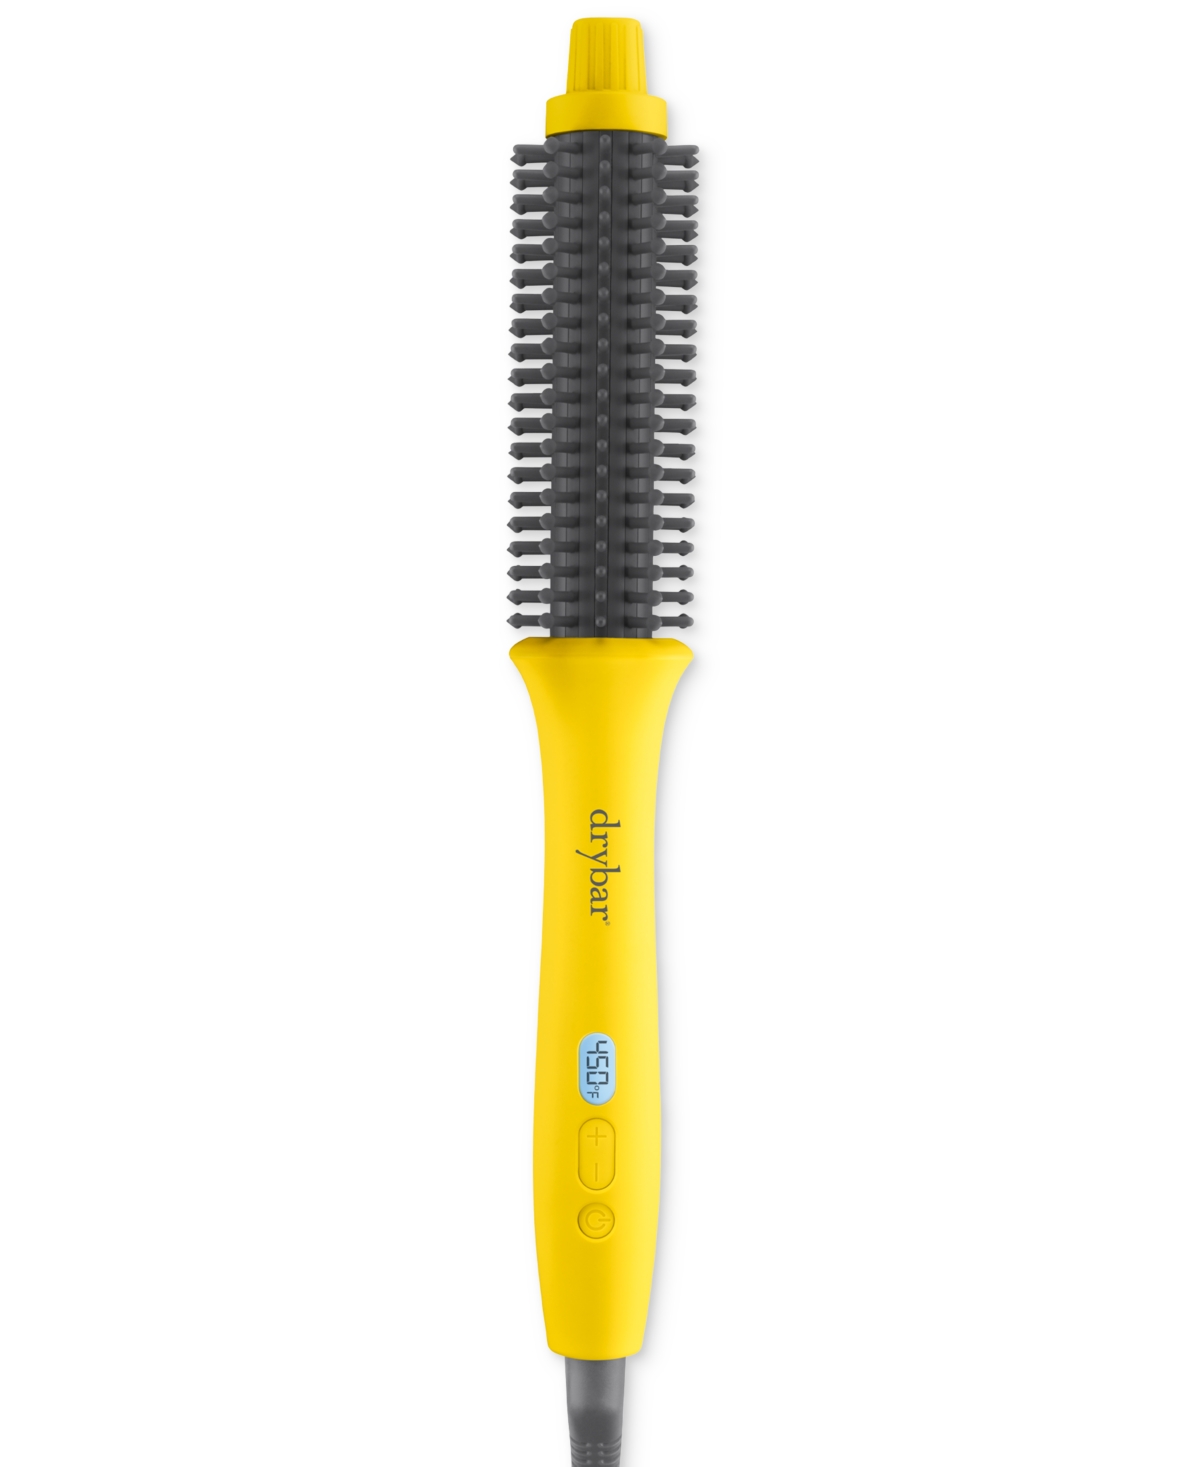 Drybar The Curl Party Heated Curling Round Brush In No Color